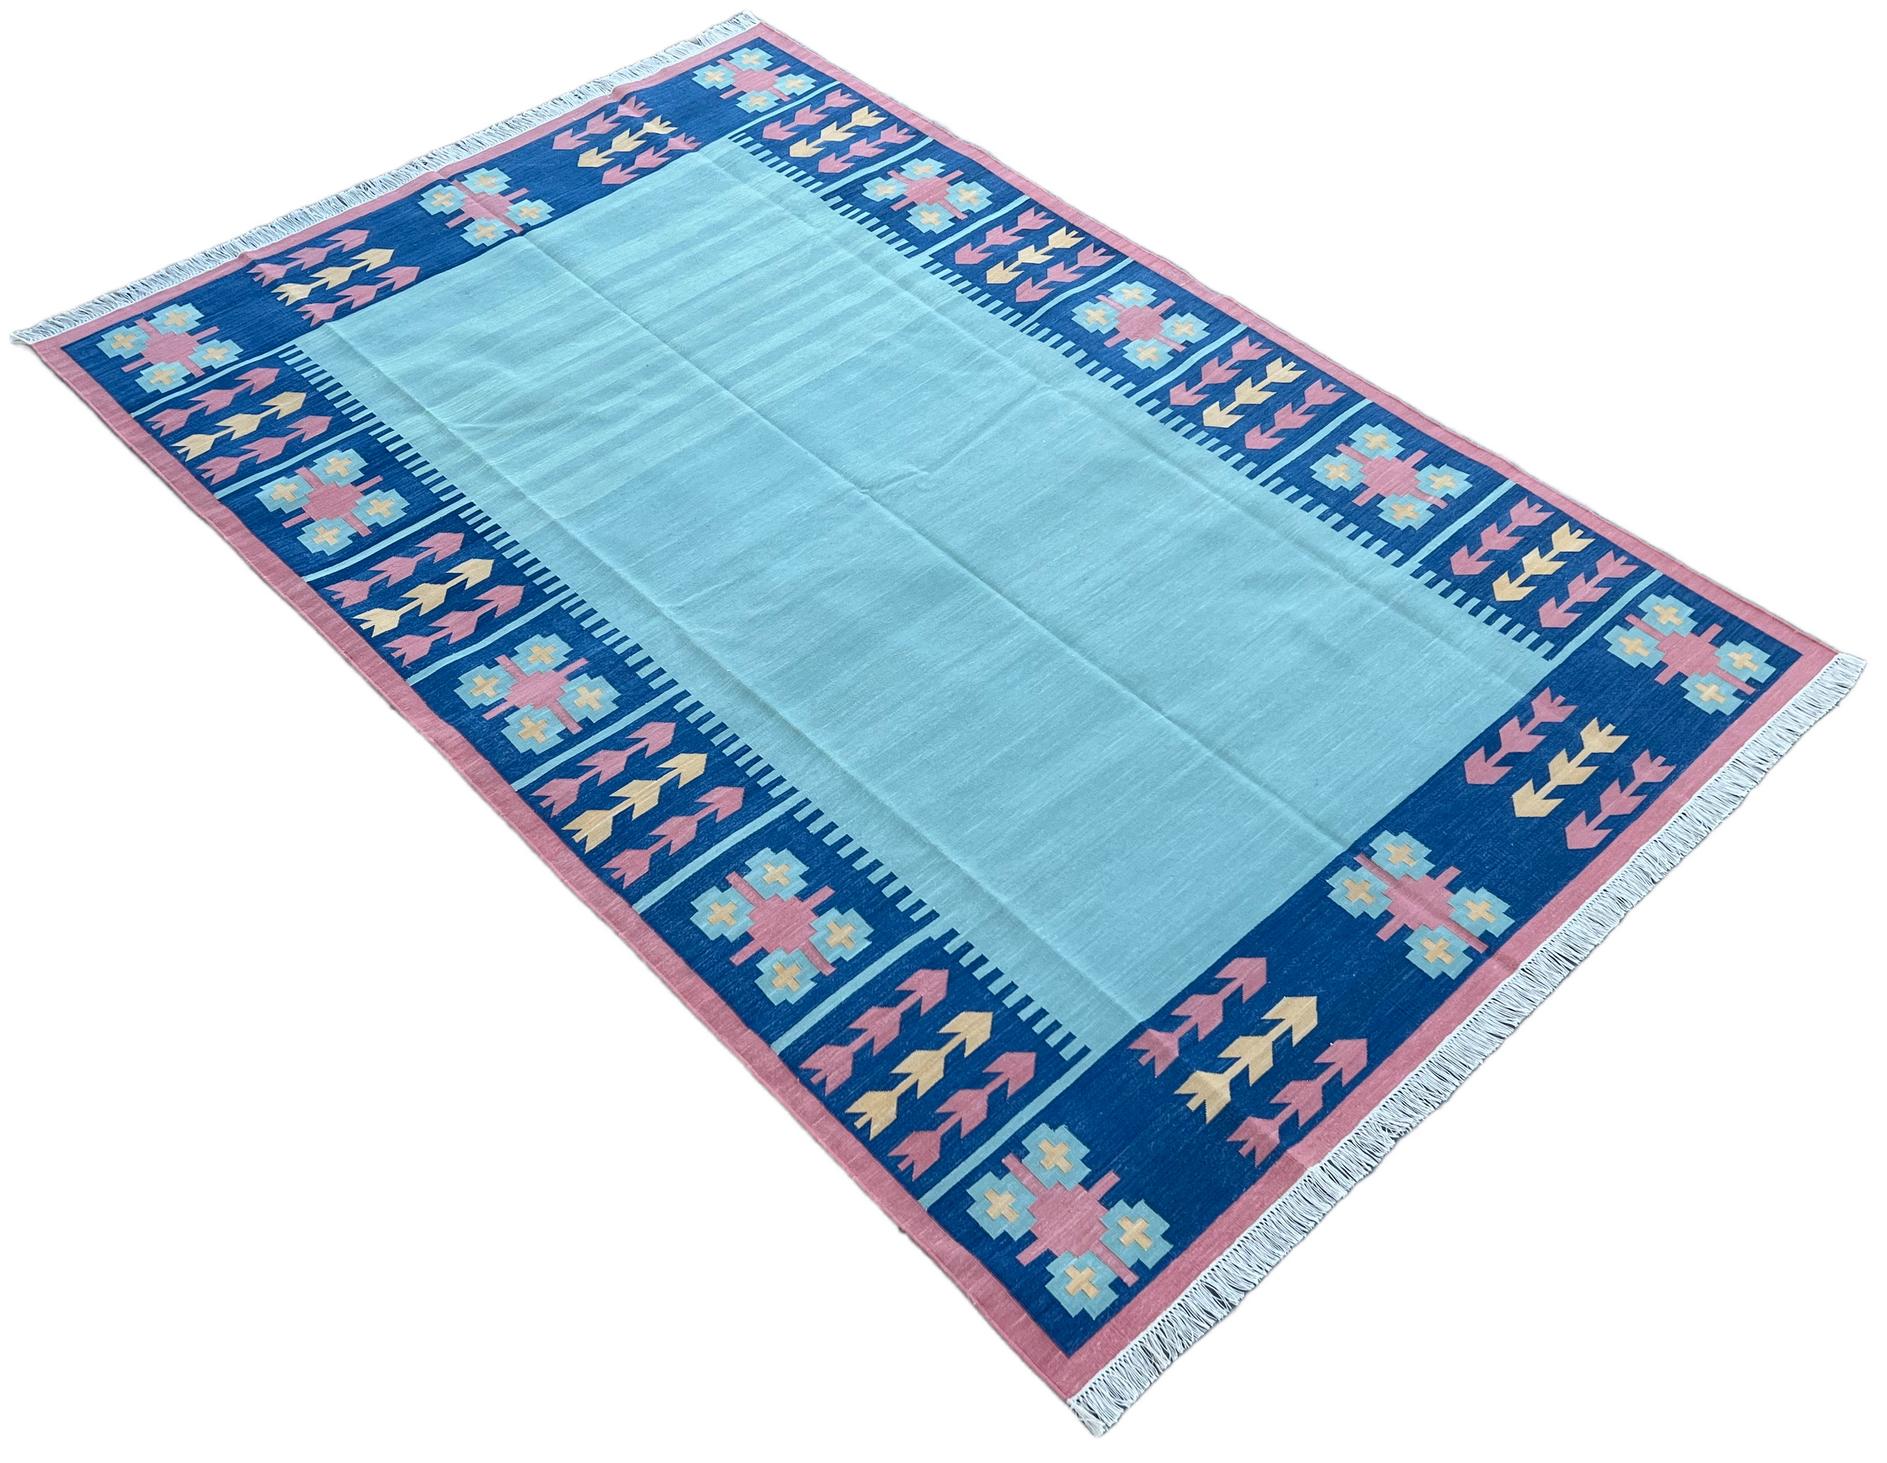 Cotton Natural Vegetable Dyed Blue And Pink Leaf Patterned Indian Rug-6'x9'
These special flat-weave dhurries are hand-woven with 15 ply 100% cotton yarn. Due to the special manufacturing techniques used to create our rugs, the size and color of